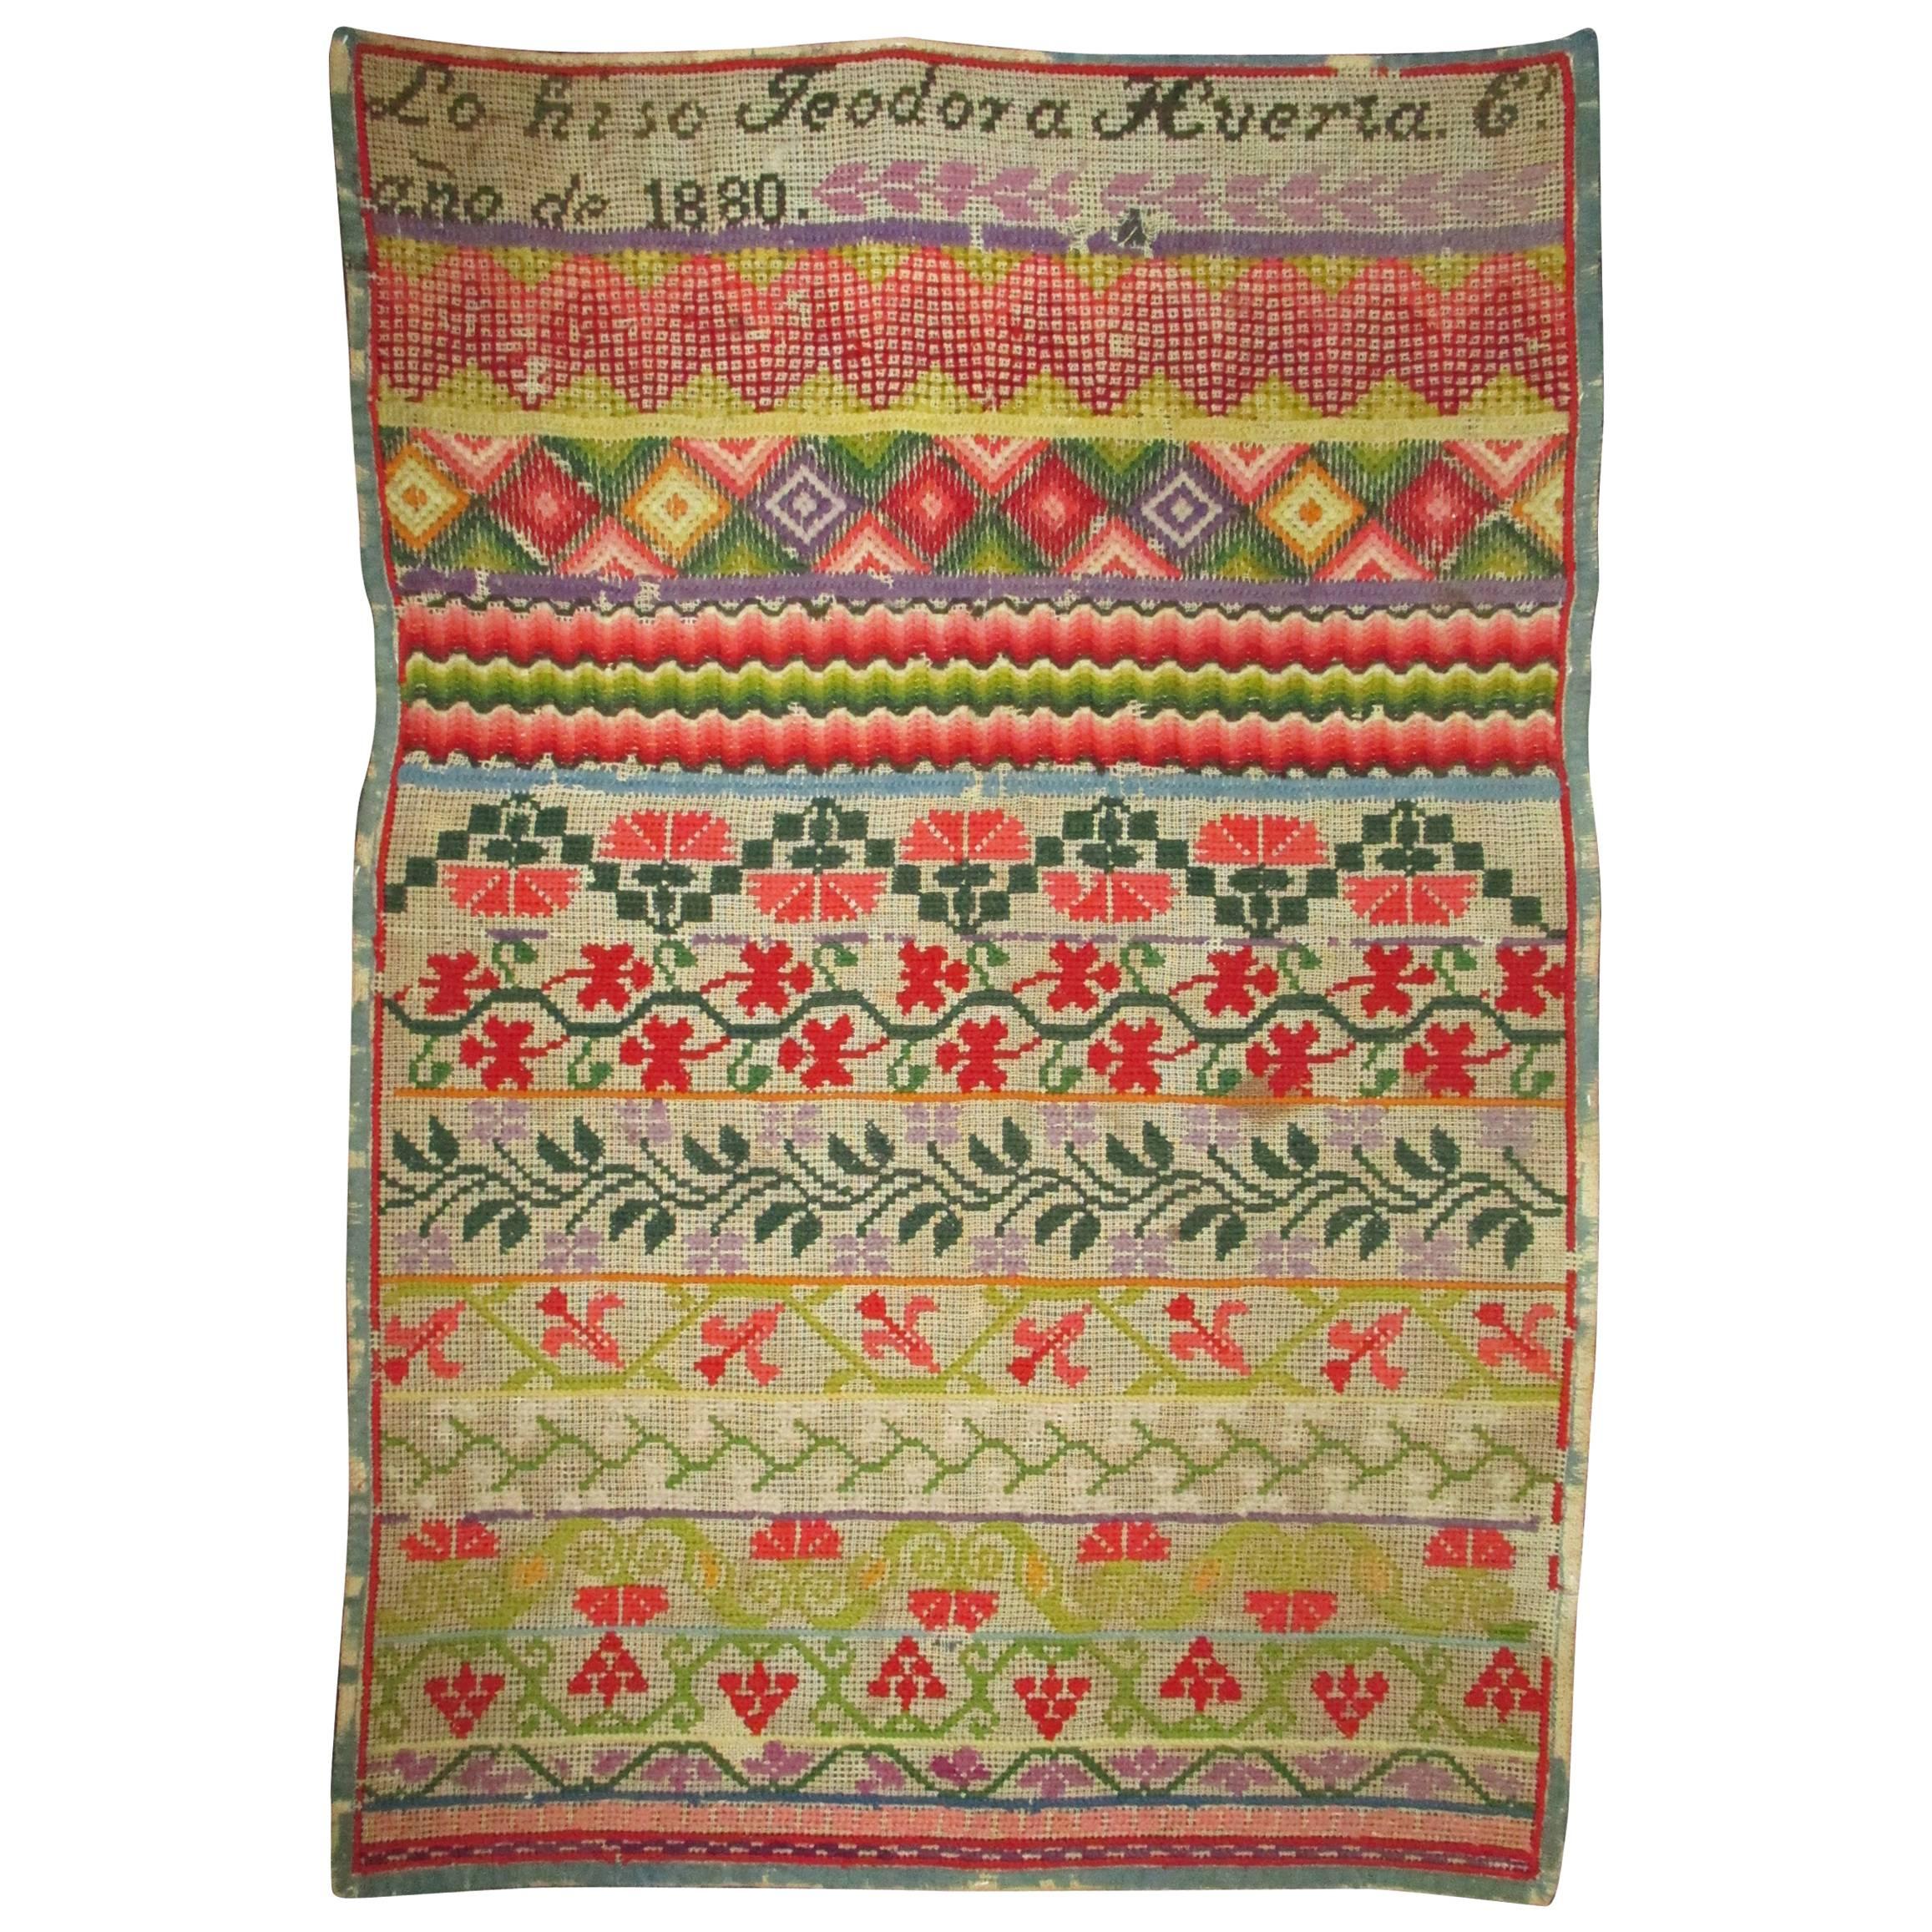 19th Century Mexican Needlepoint Sampler, Dated 1880, Colorful and Elaborate For Sale